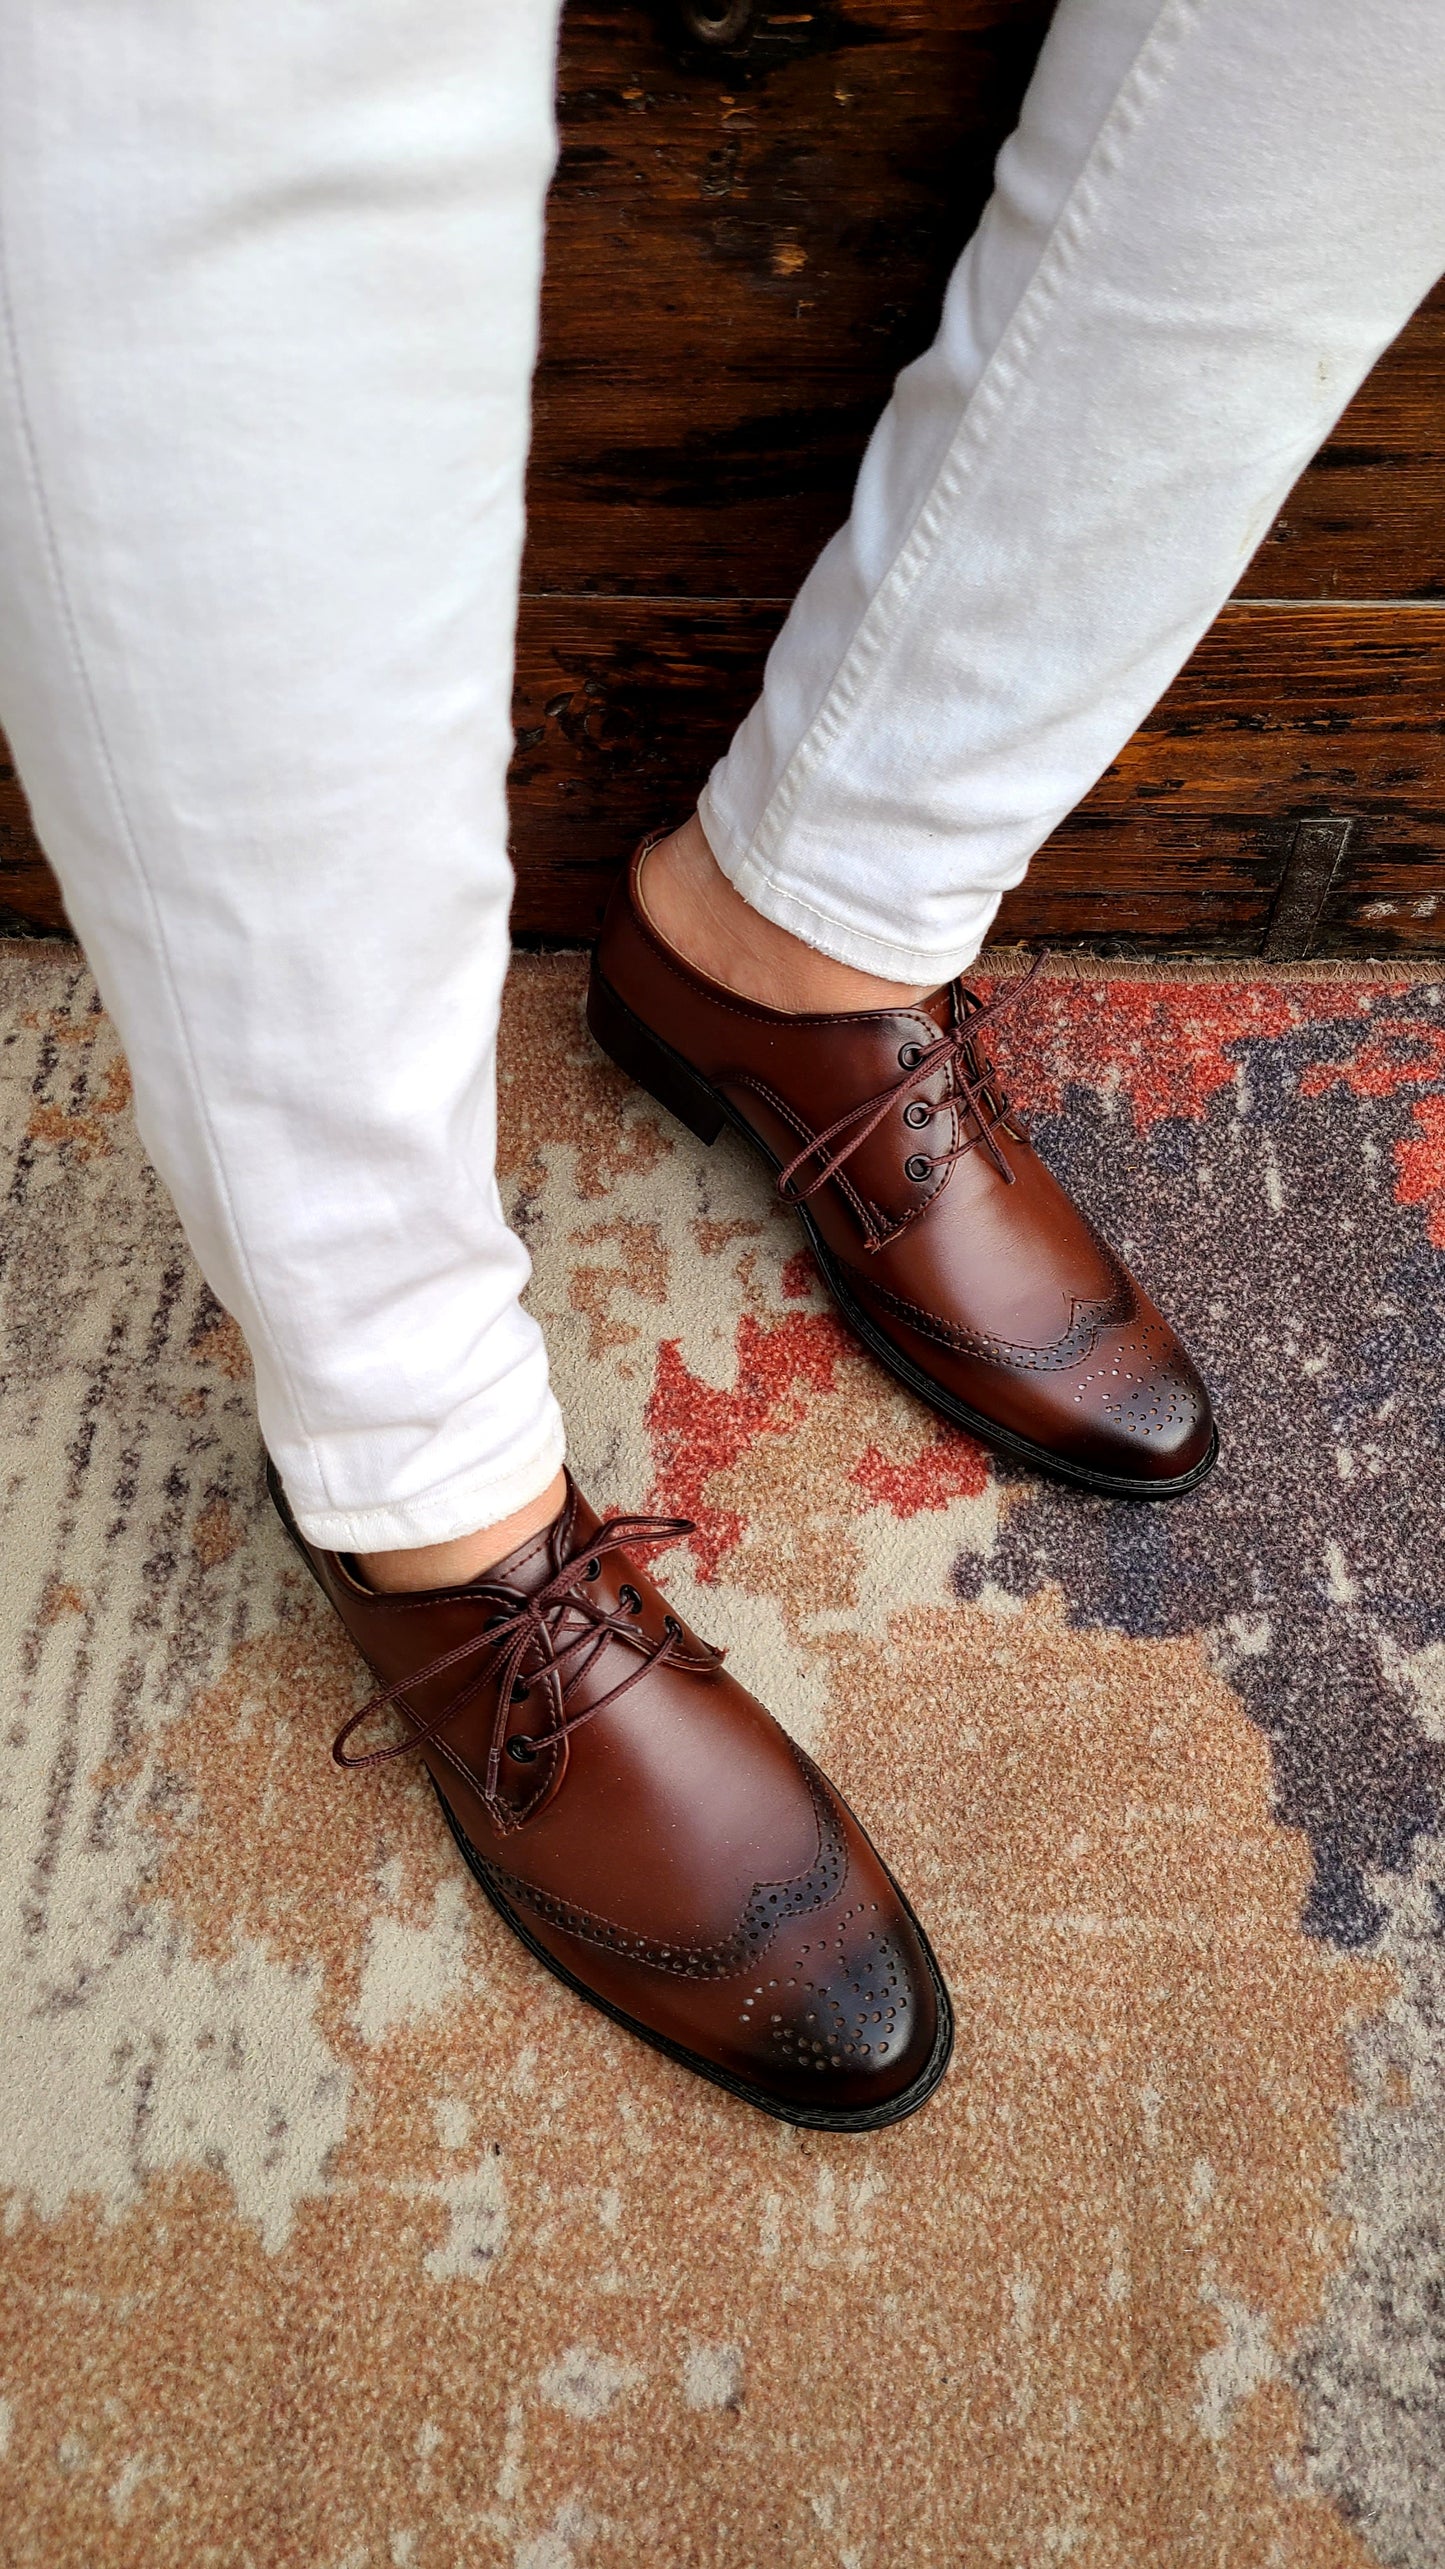 The Classic Brogues Brown